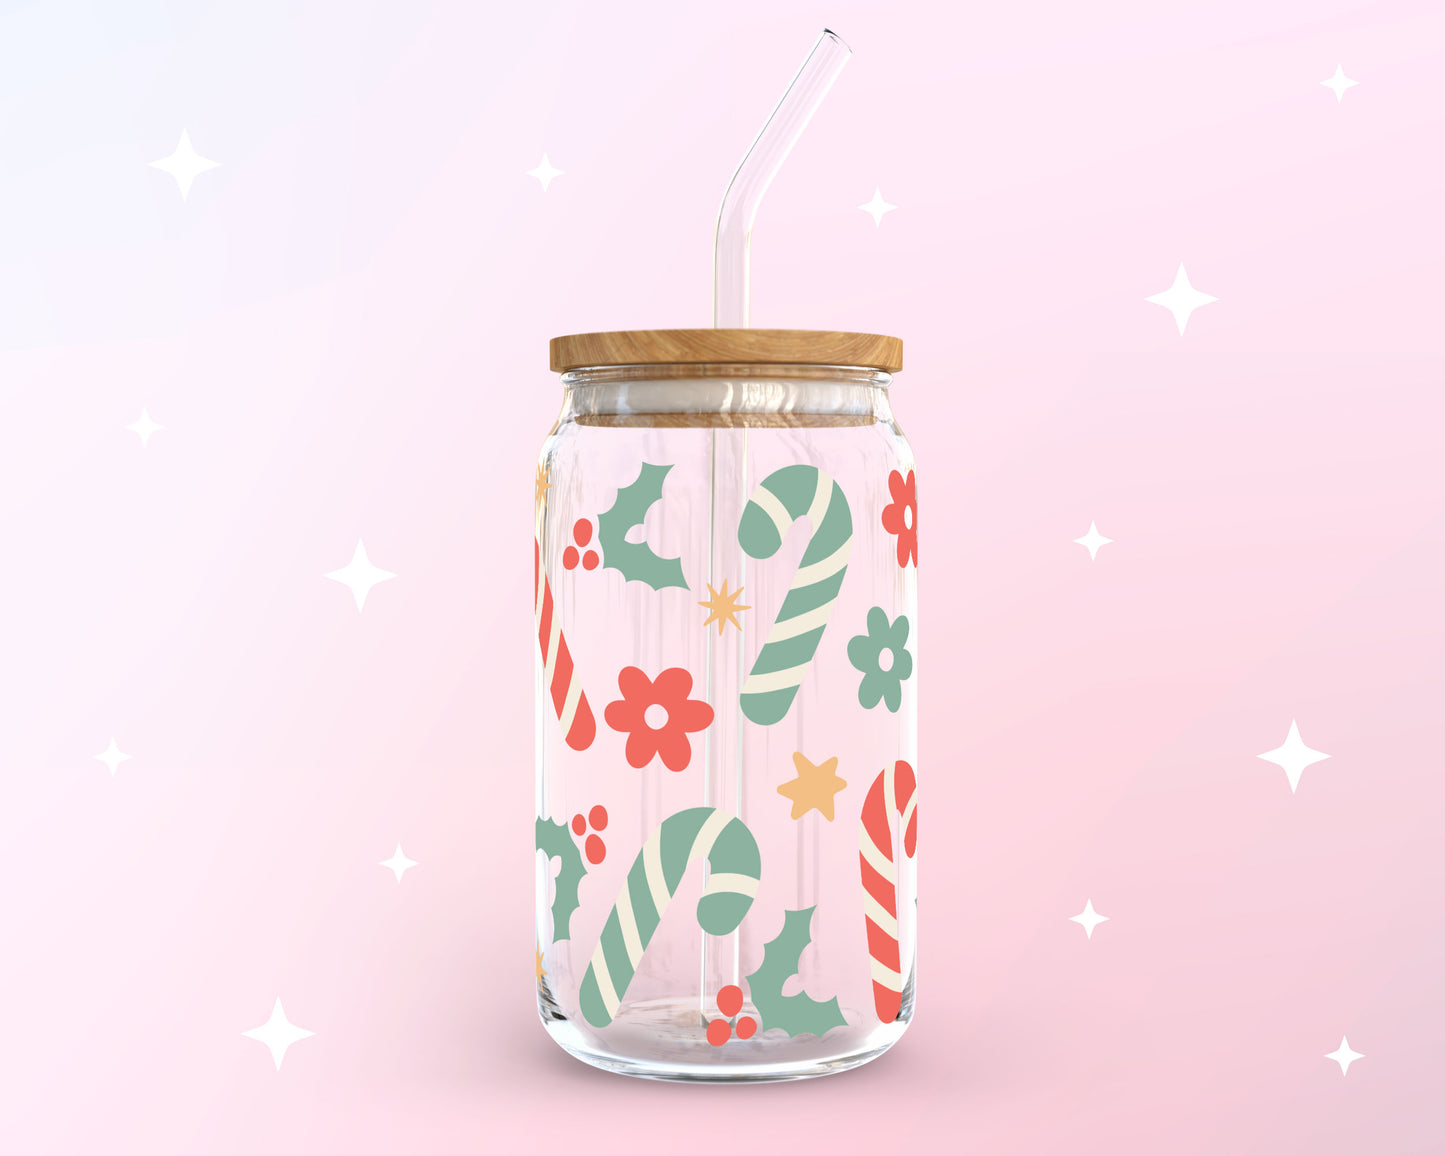 16oz Libbey Can Cup Wrap | Pastel Candy Cane SVG Cut File for Cricut, Cameo Silhouette | Free SVG Cut File